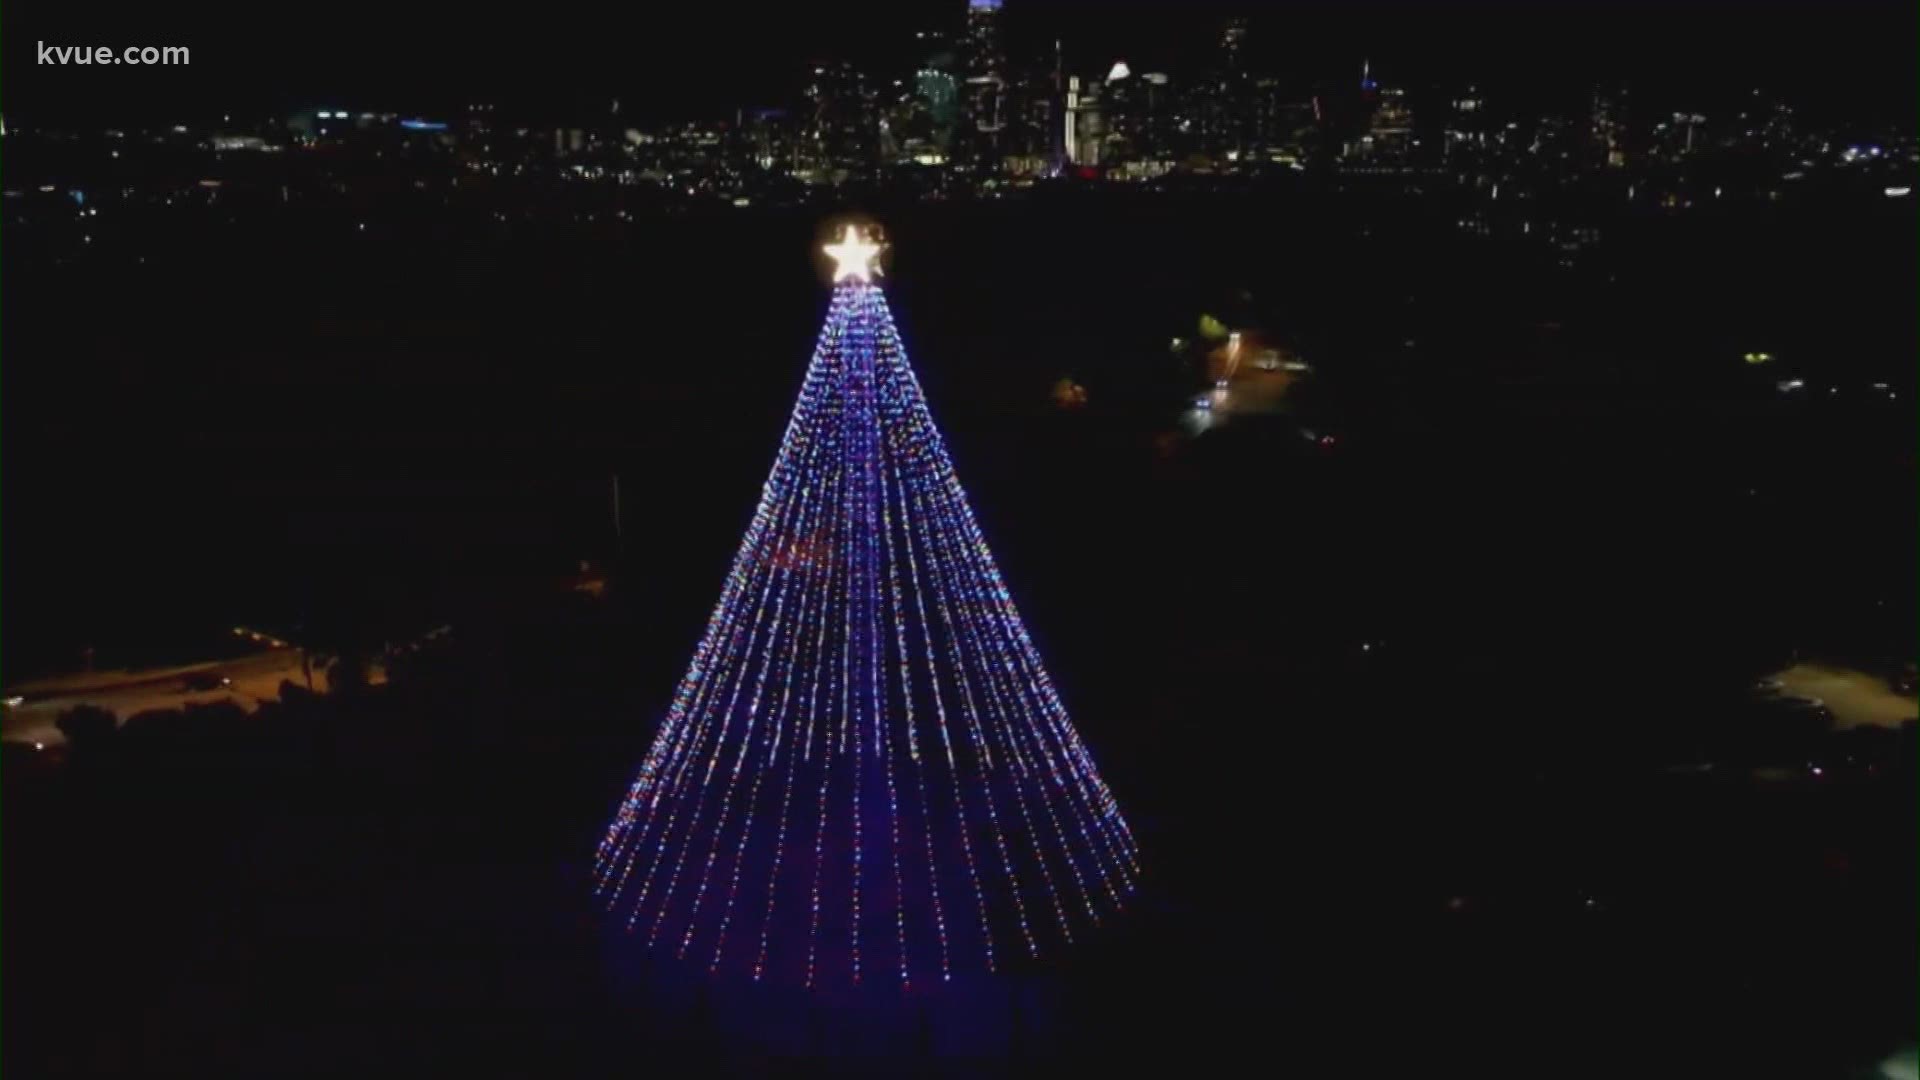 Austin's Zilker holiday tree was officially lit on Sunday evening.